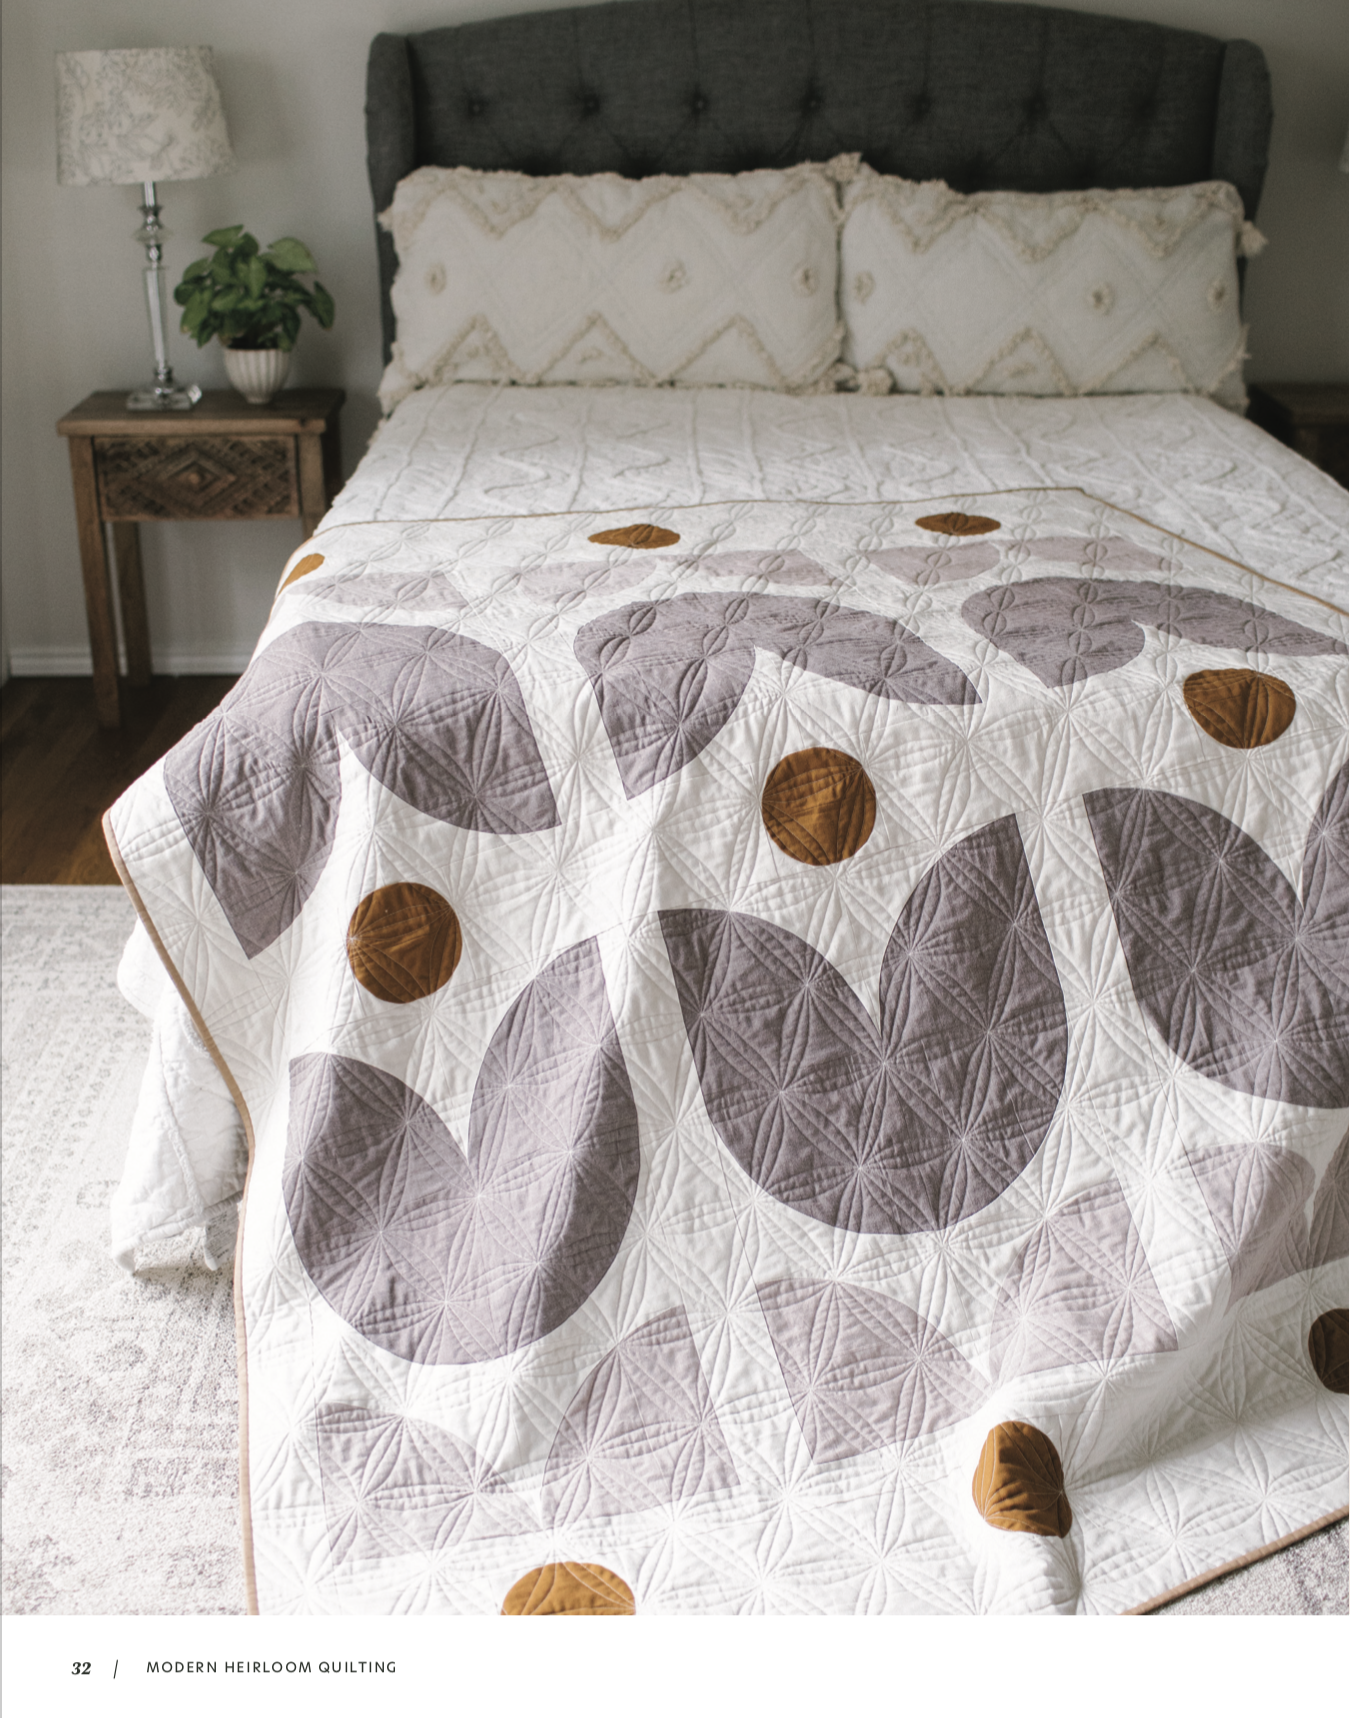 How To Tastefully Decorate Your Home With Quilts